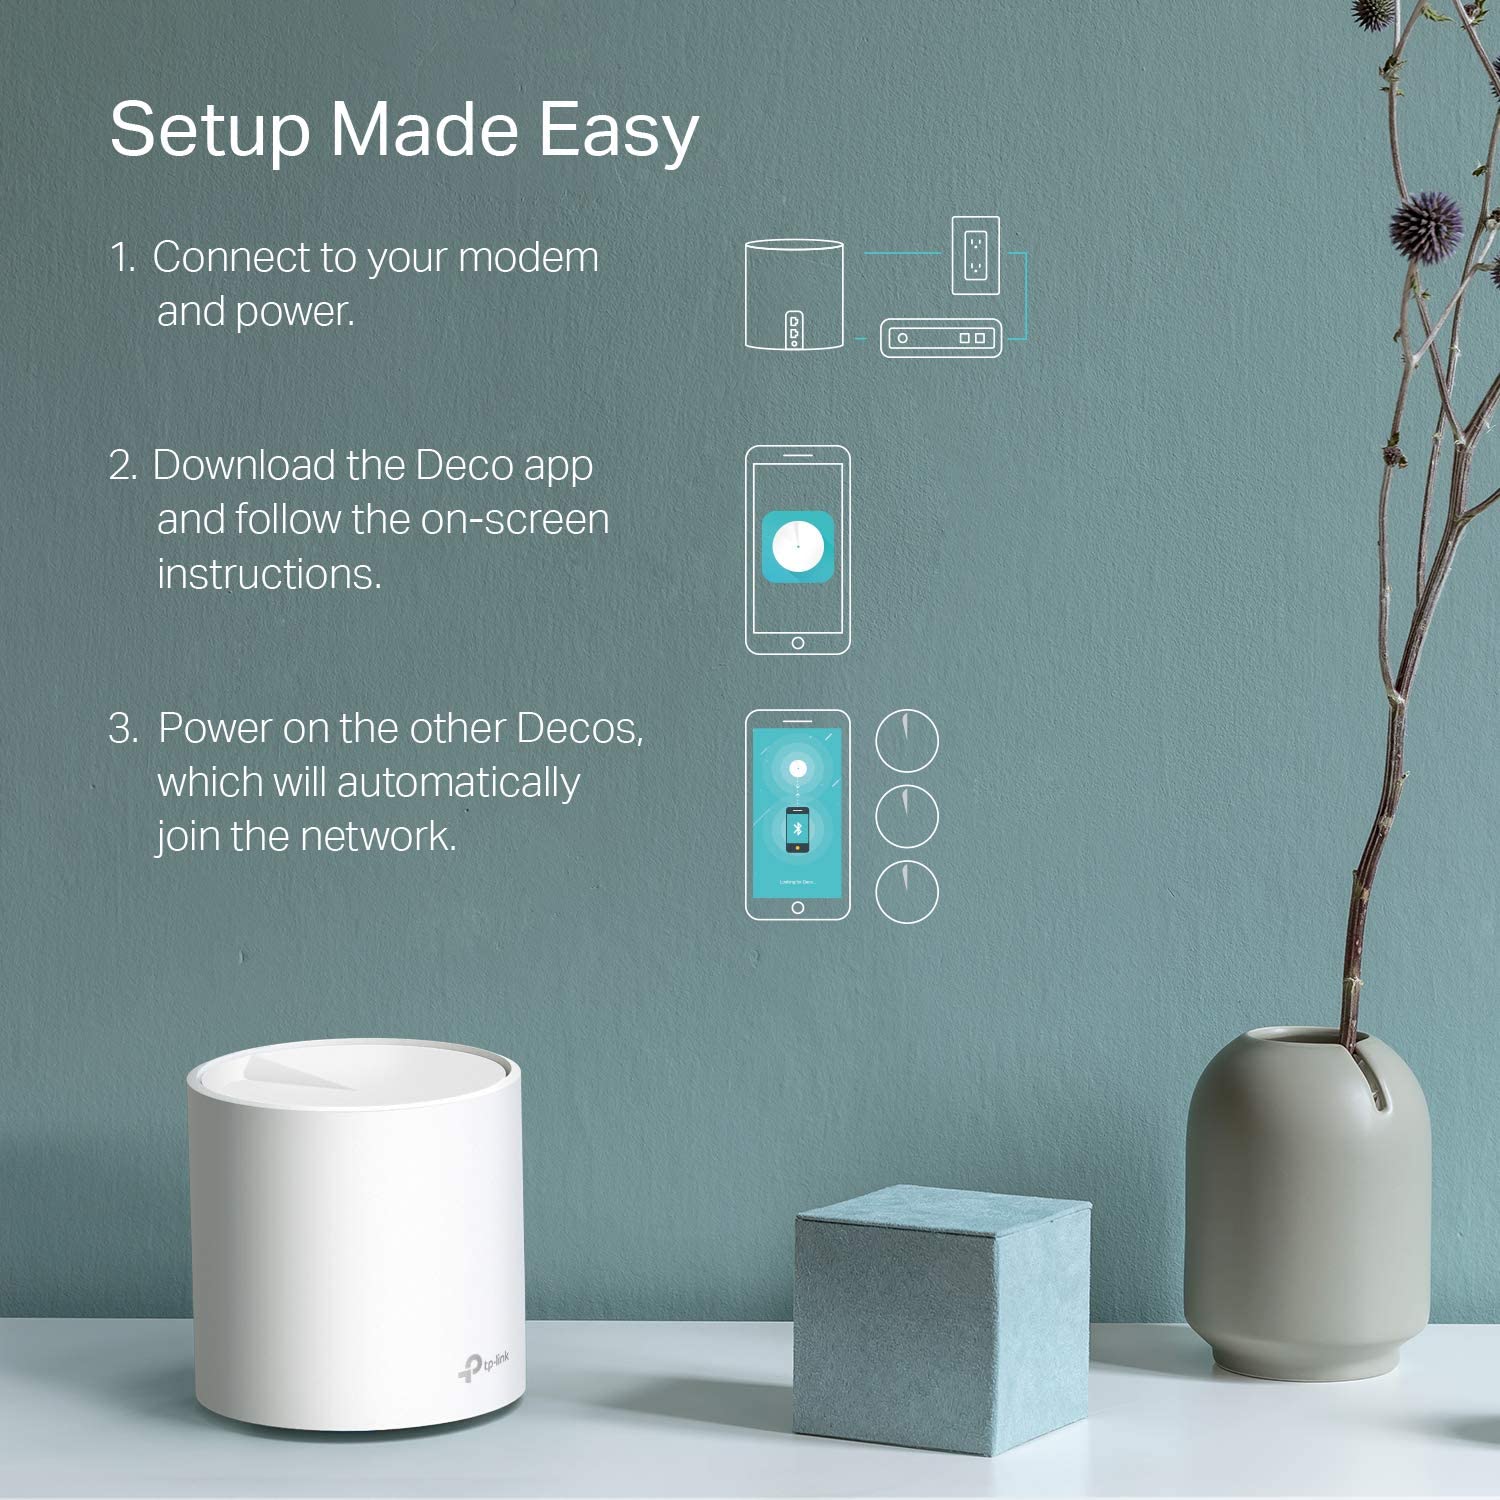 TP-Link Deco WiFi 6 Mesh WiFi System(Deco X20) - Covers up to 5800 Sq.Ft. , Replaces WiFi Routers and WiFi Extenders, Works with Alexa, 3-Pack WiFi 6 Mesh System, 3-pack(Newer Model)